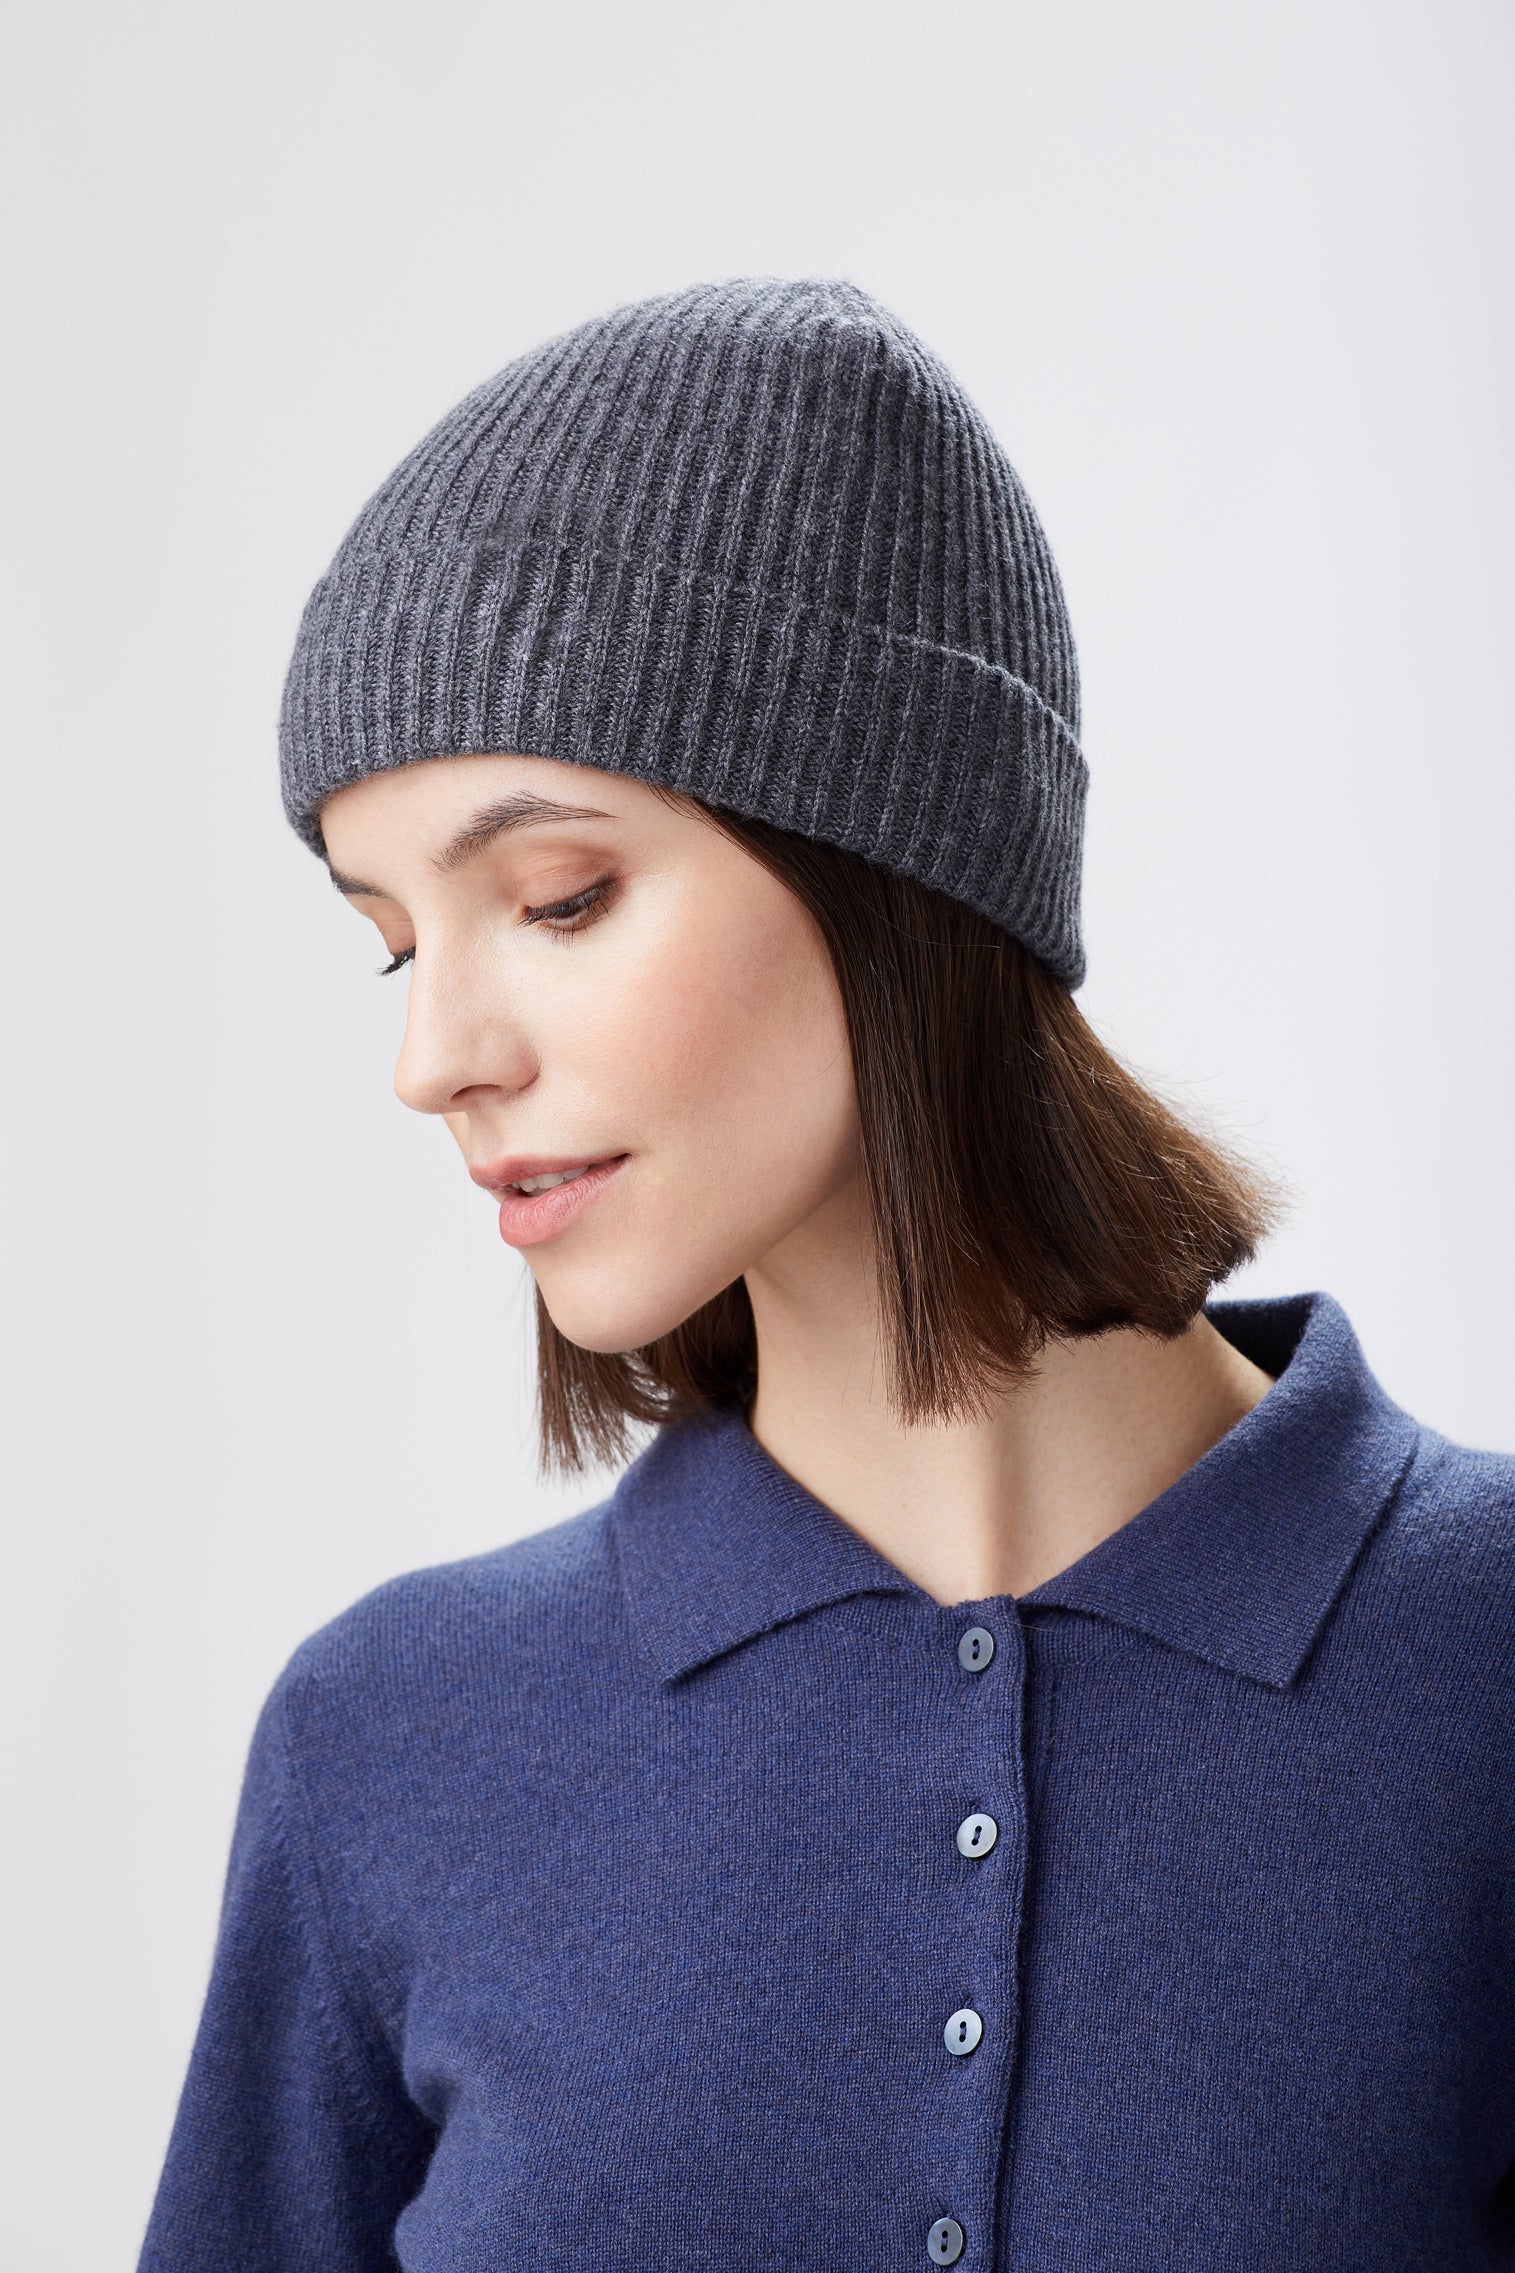 Grey Cashmere Ski Beanie - Products - Lock & Co. Hatters London UK